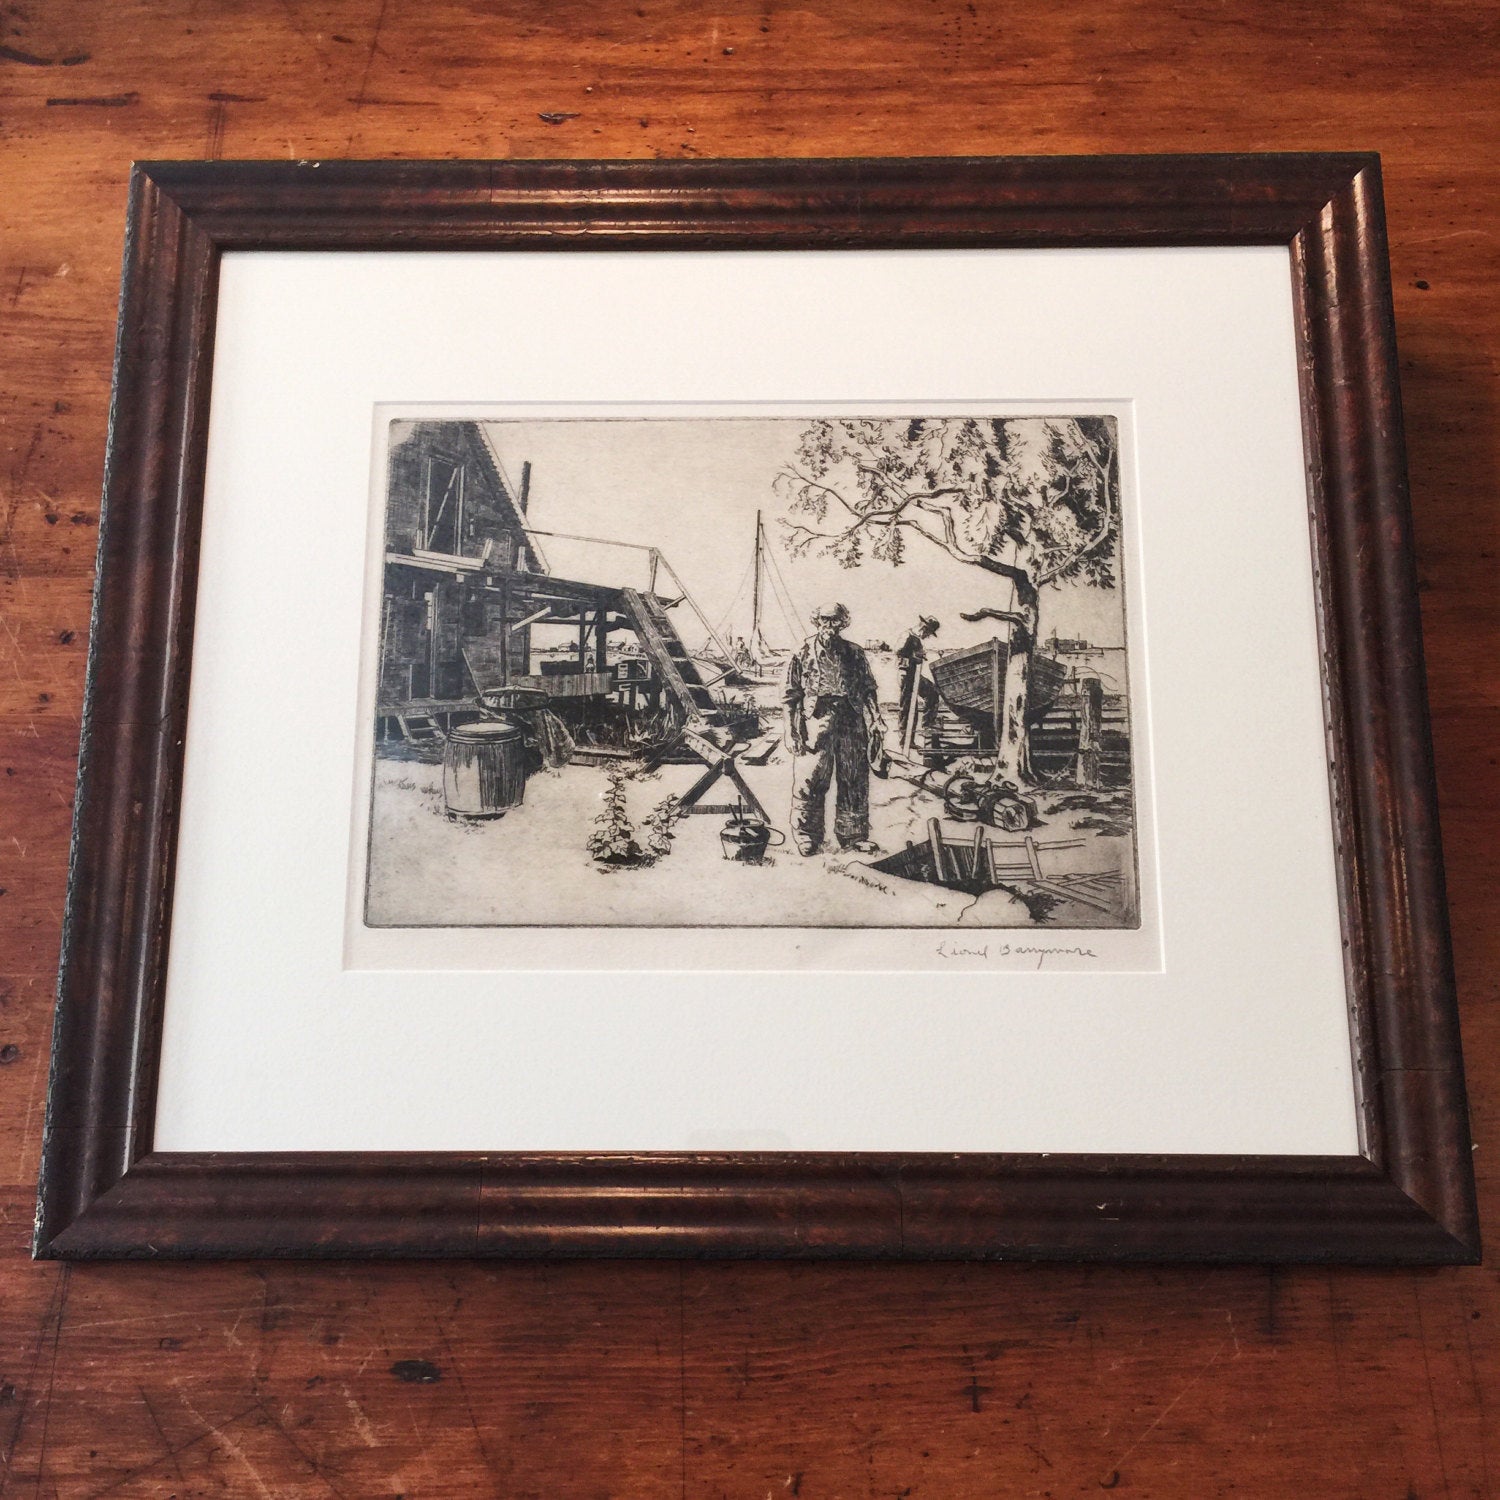 Lionel Barrymore Woodcut - Point Mugu - Signed in Pencil - Authentic - Vintage - Framed - Hollywood Art - Drew - Rare